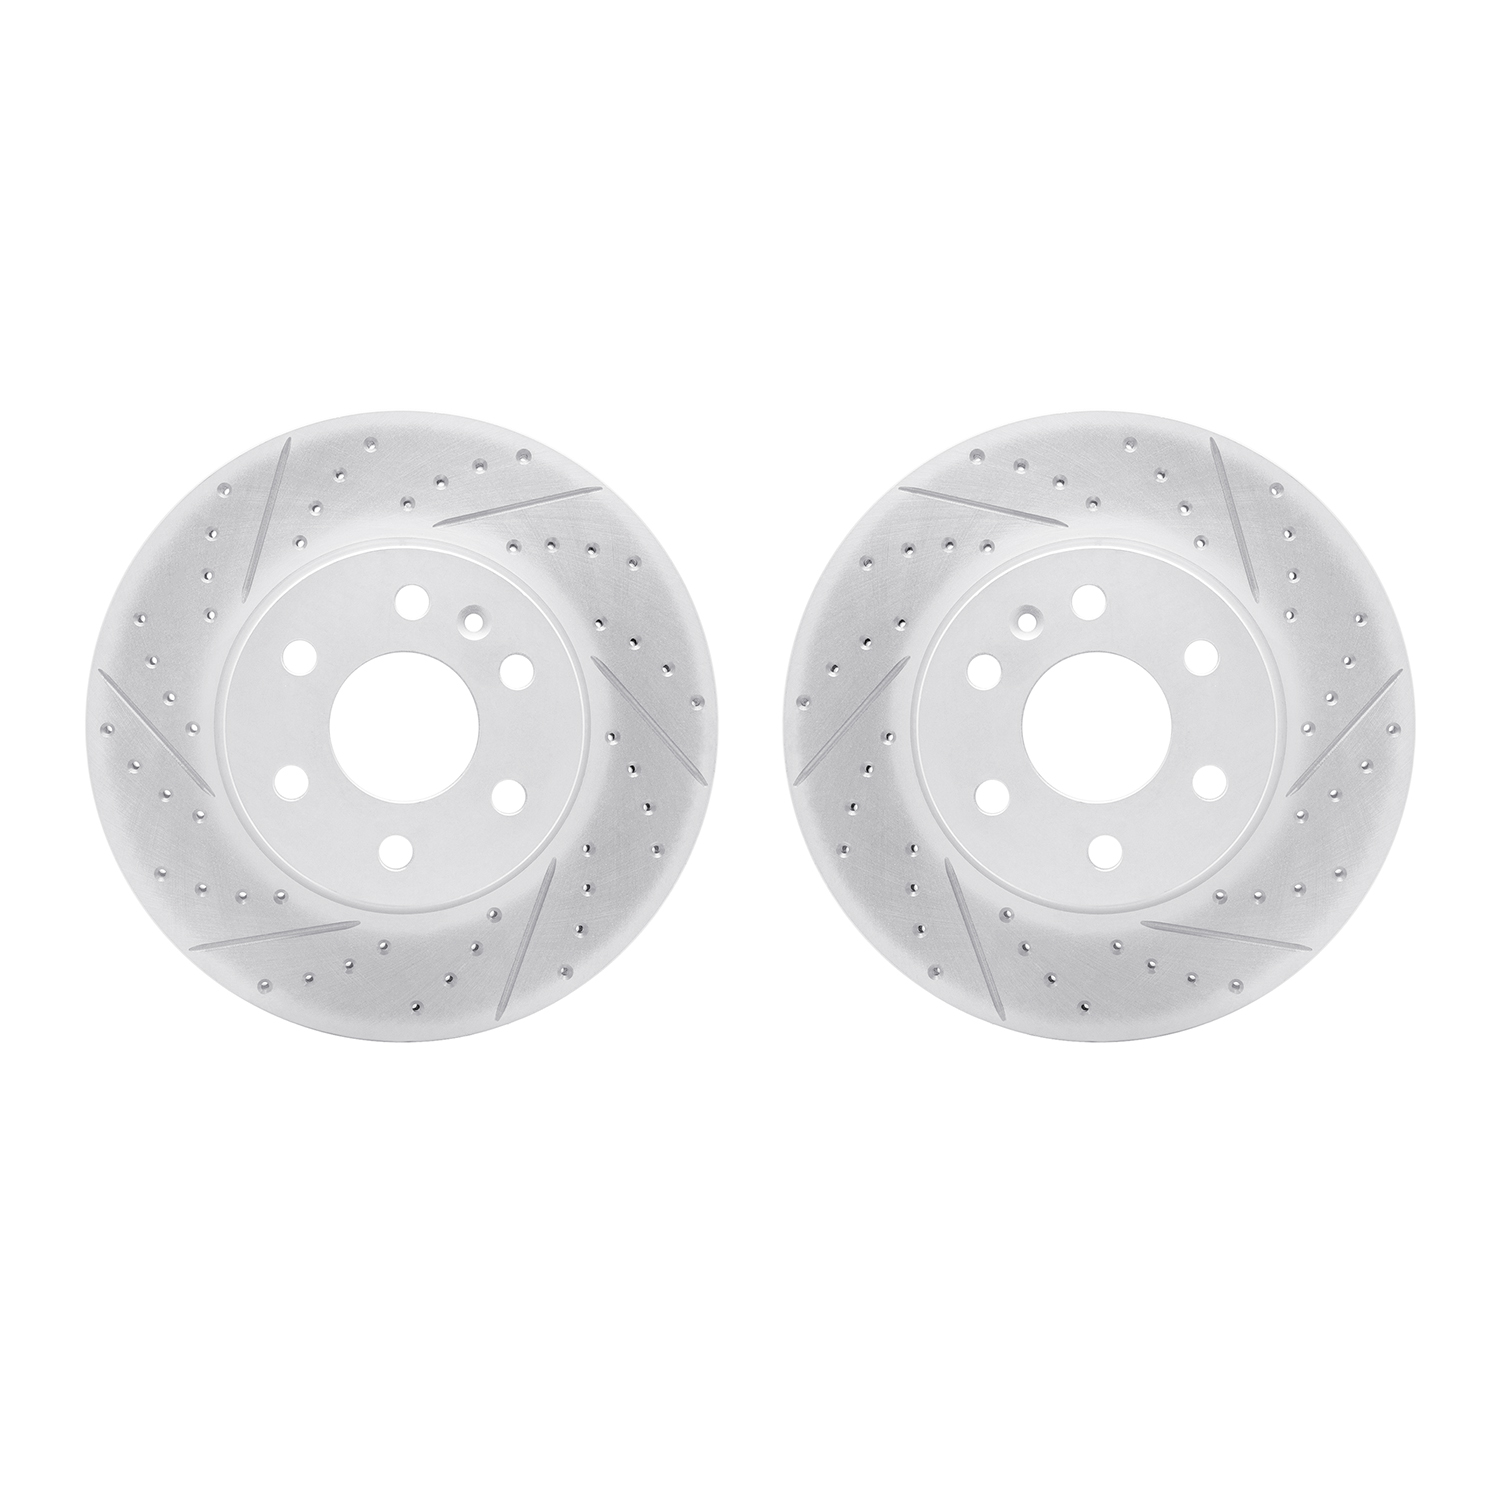 2002-48025 Geoperformance Drilled/Slotted Brake Rotors, 2015-2020 GM, Position: Front